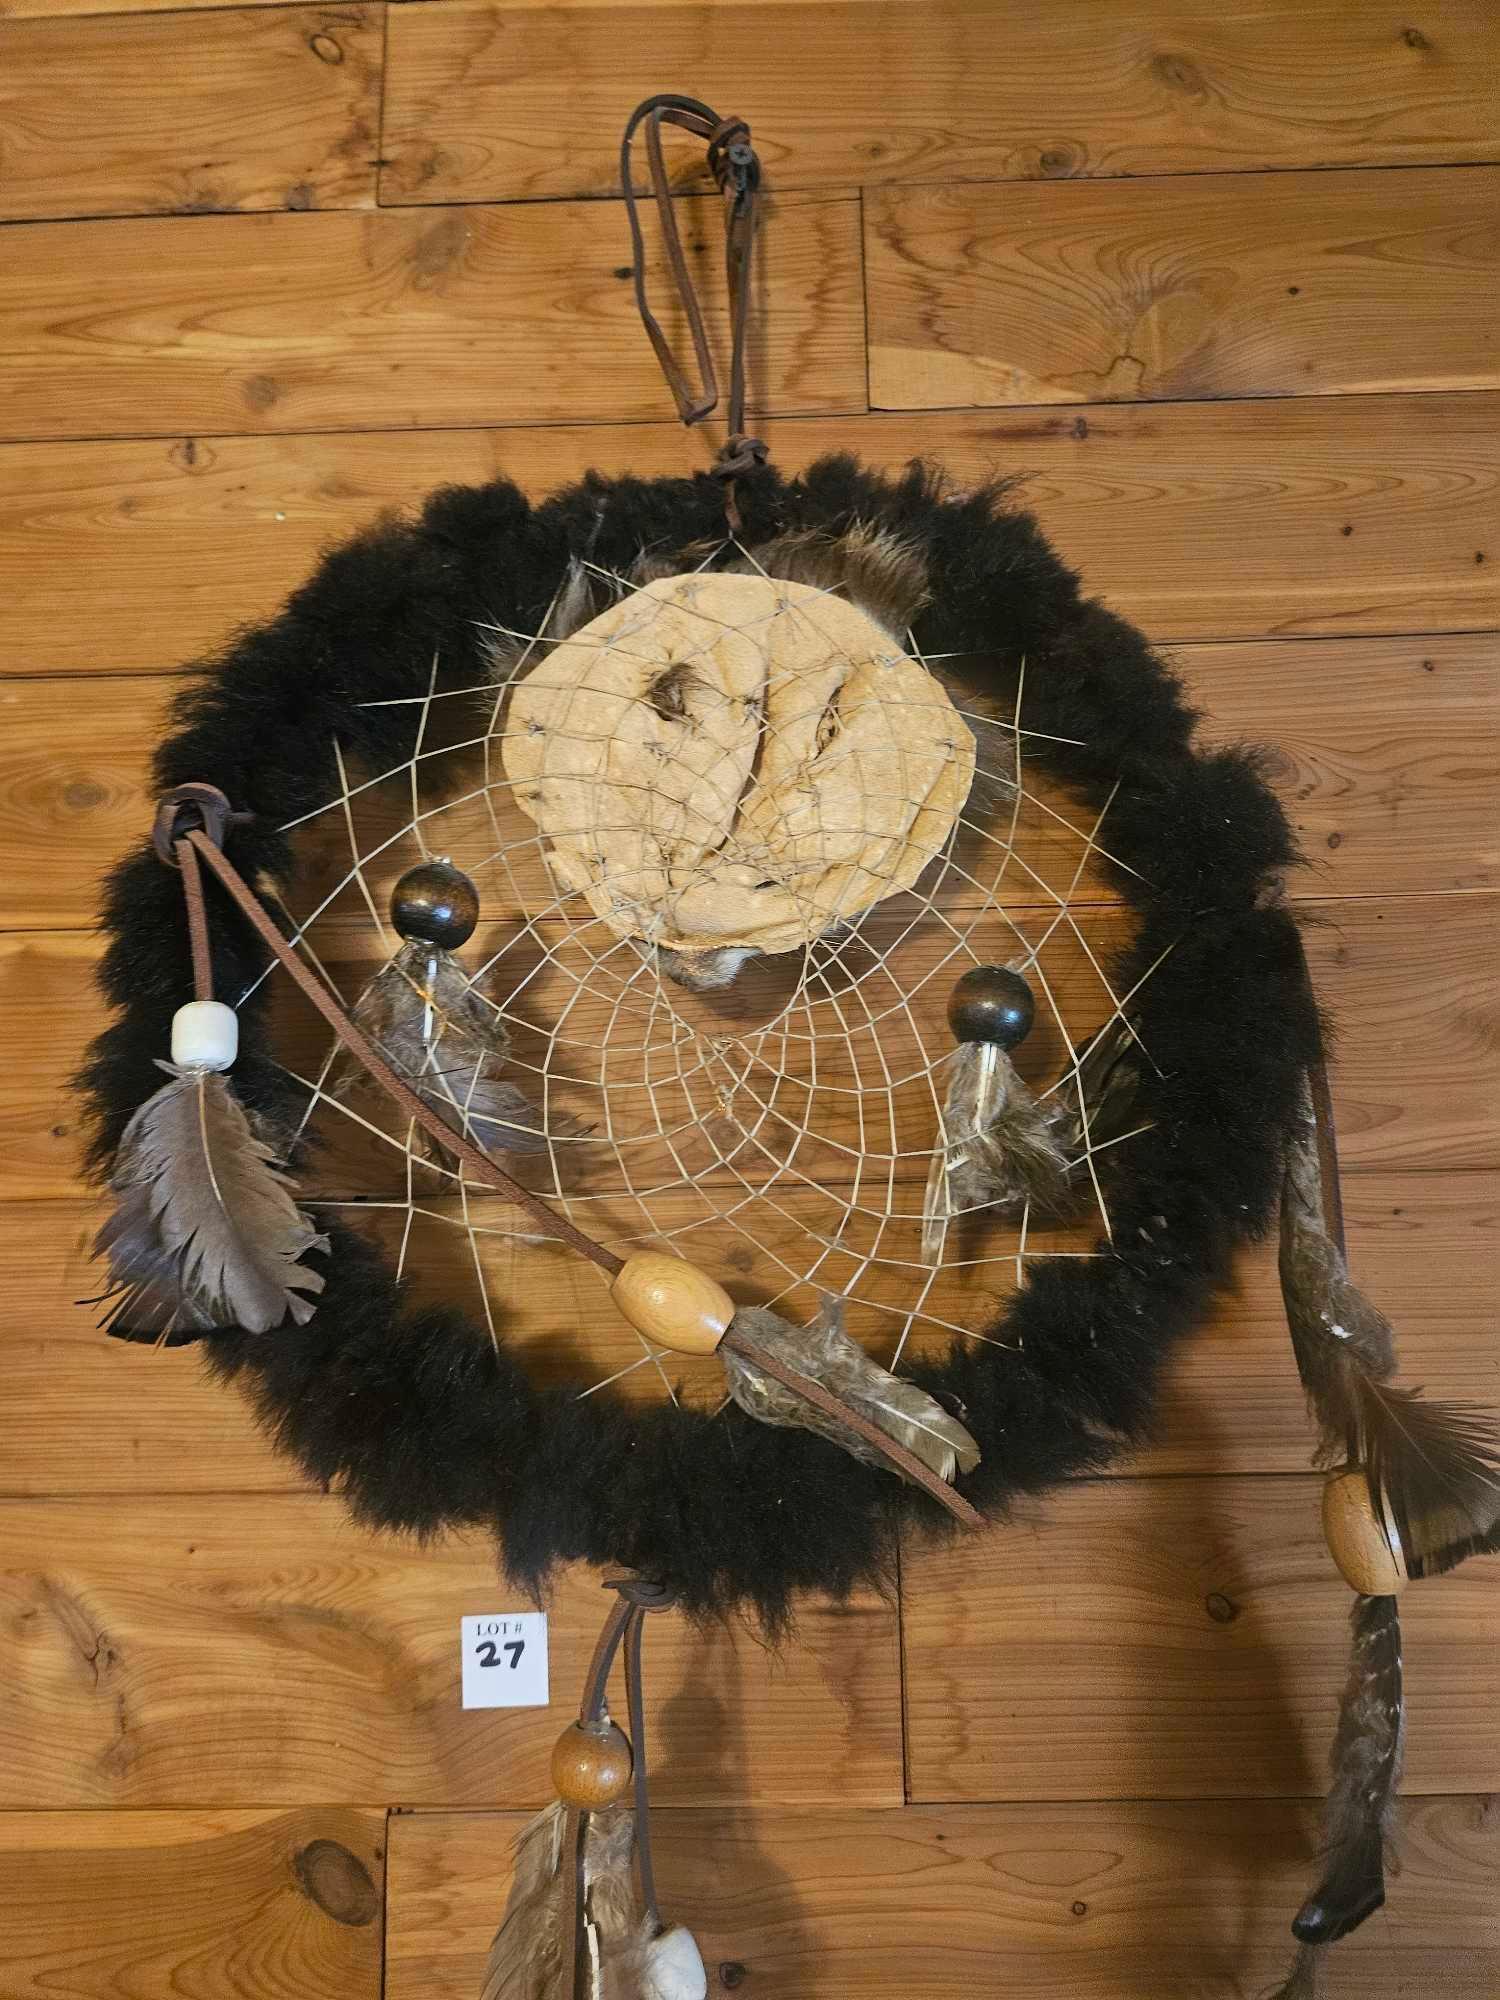 NATIVE AMERICAN STRETCHED RACOON HIDE DREAM CATCHER, BEADED FEATHERED